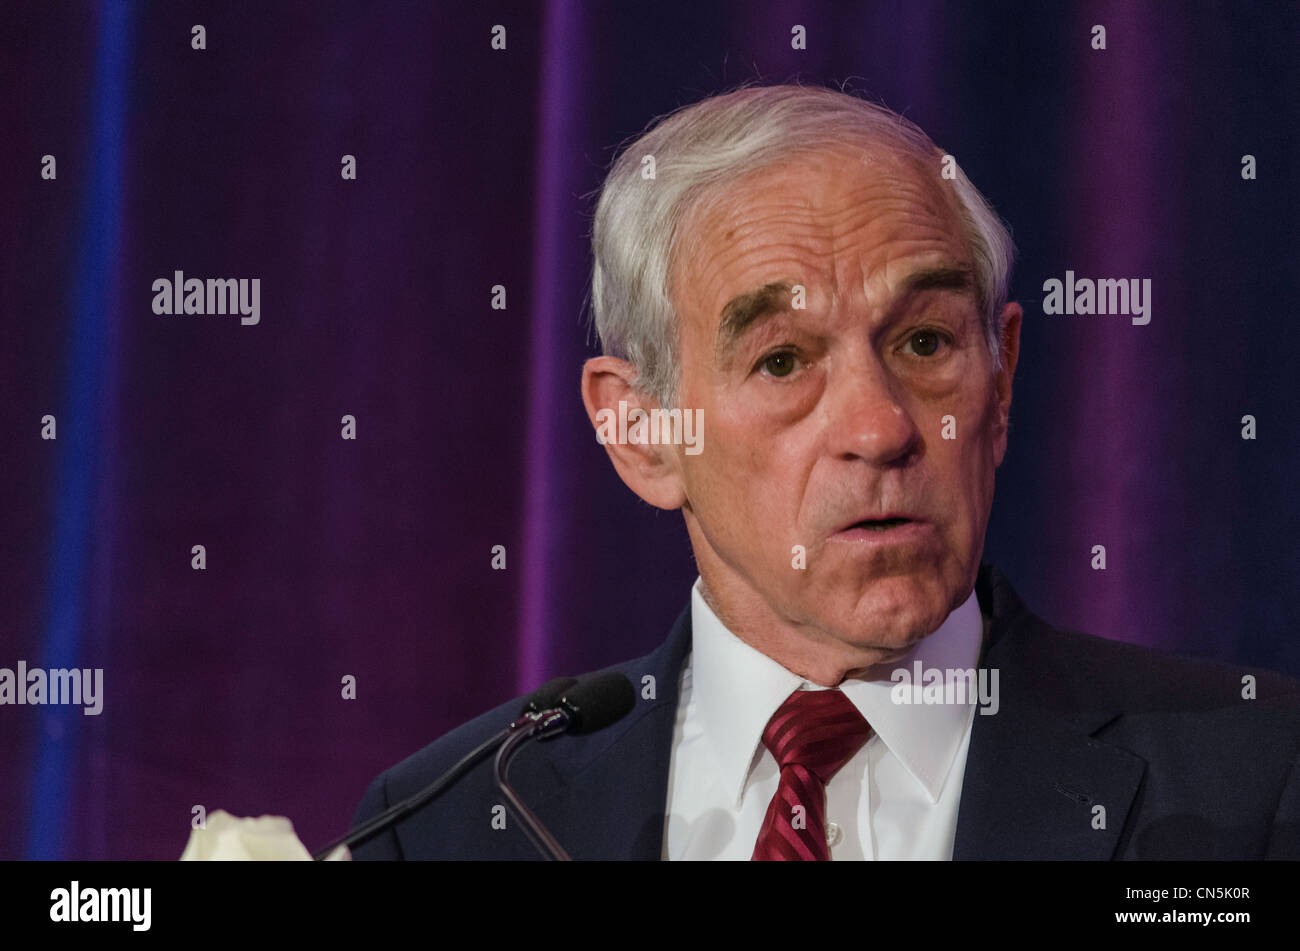 2012 presidential candidate, Ron Paul, speaks to supporters in San Francisco, California on 04/05/2012. Stock Photo